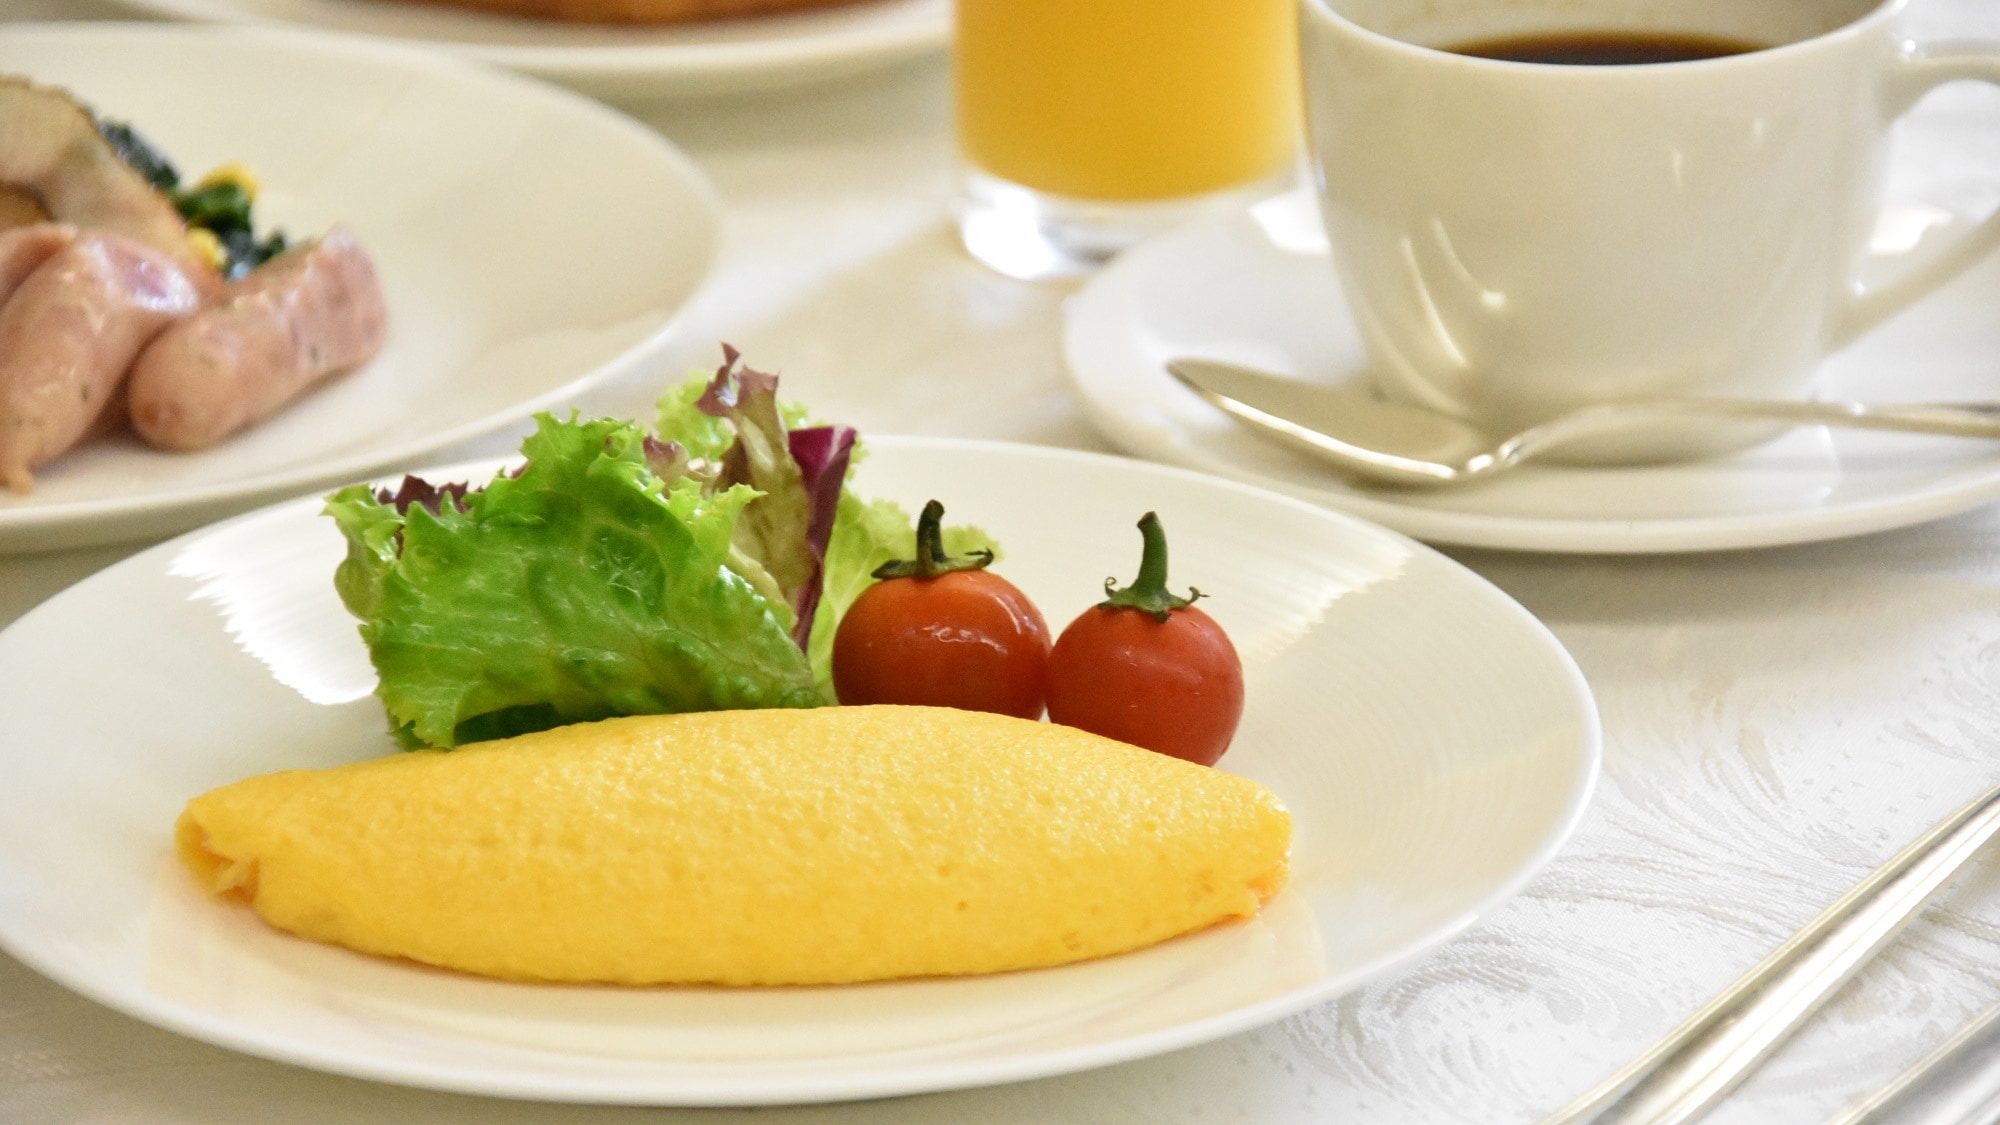 << Breakfast >> A Western chef will bake it right in front of you! "Fluffy omelet"